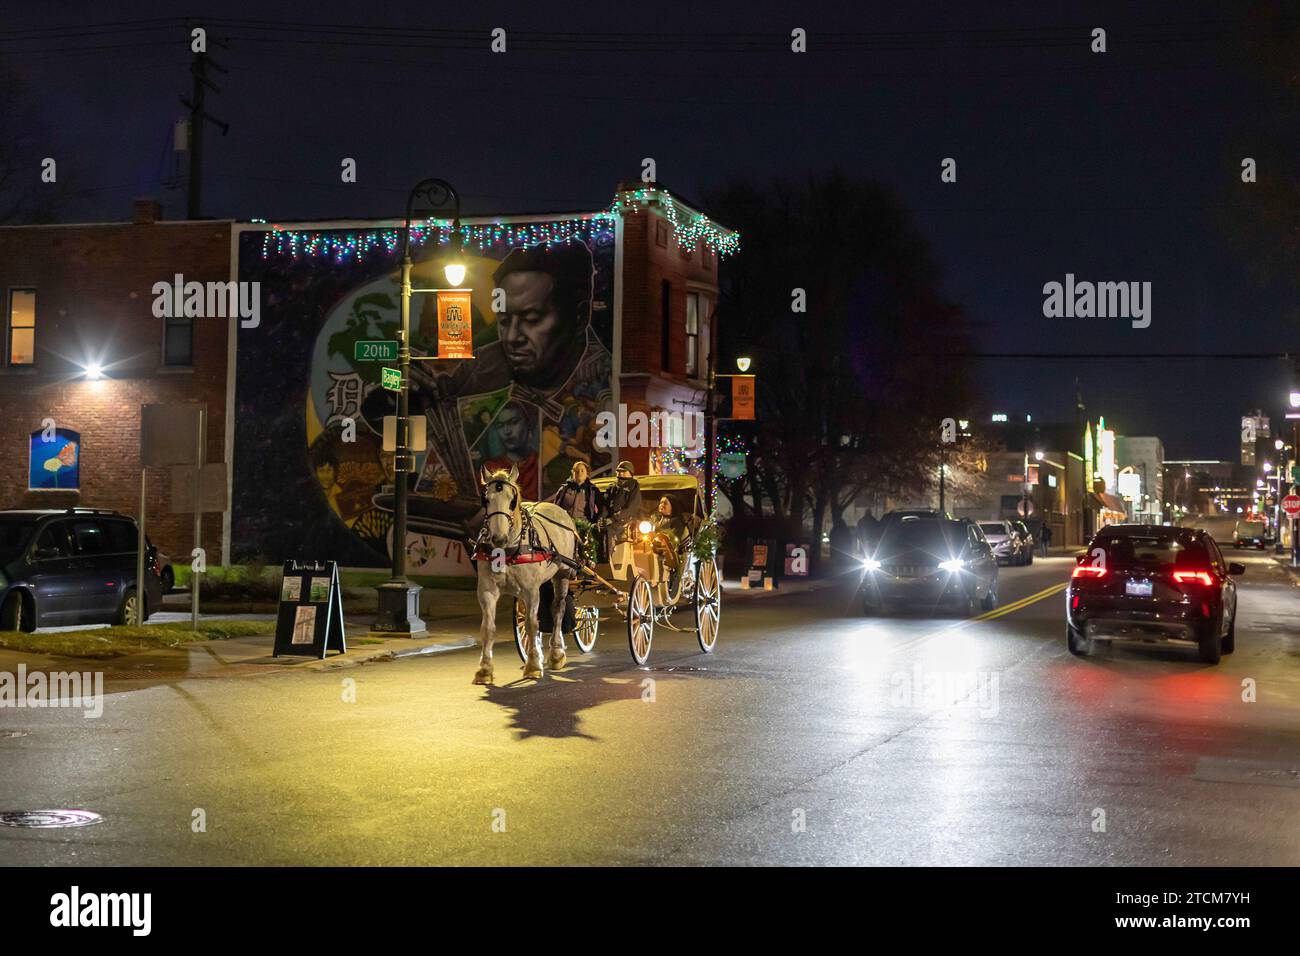 Detroit, Michigan - The Southwest Detroit Holiday Fest, in the city's Mexican-American neighborhood. Horse-drawn carriage rides were one of the activi Stock Photo